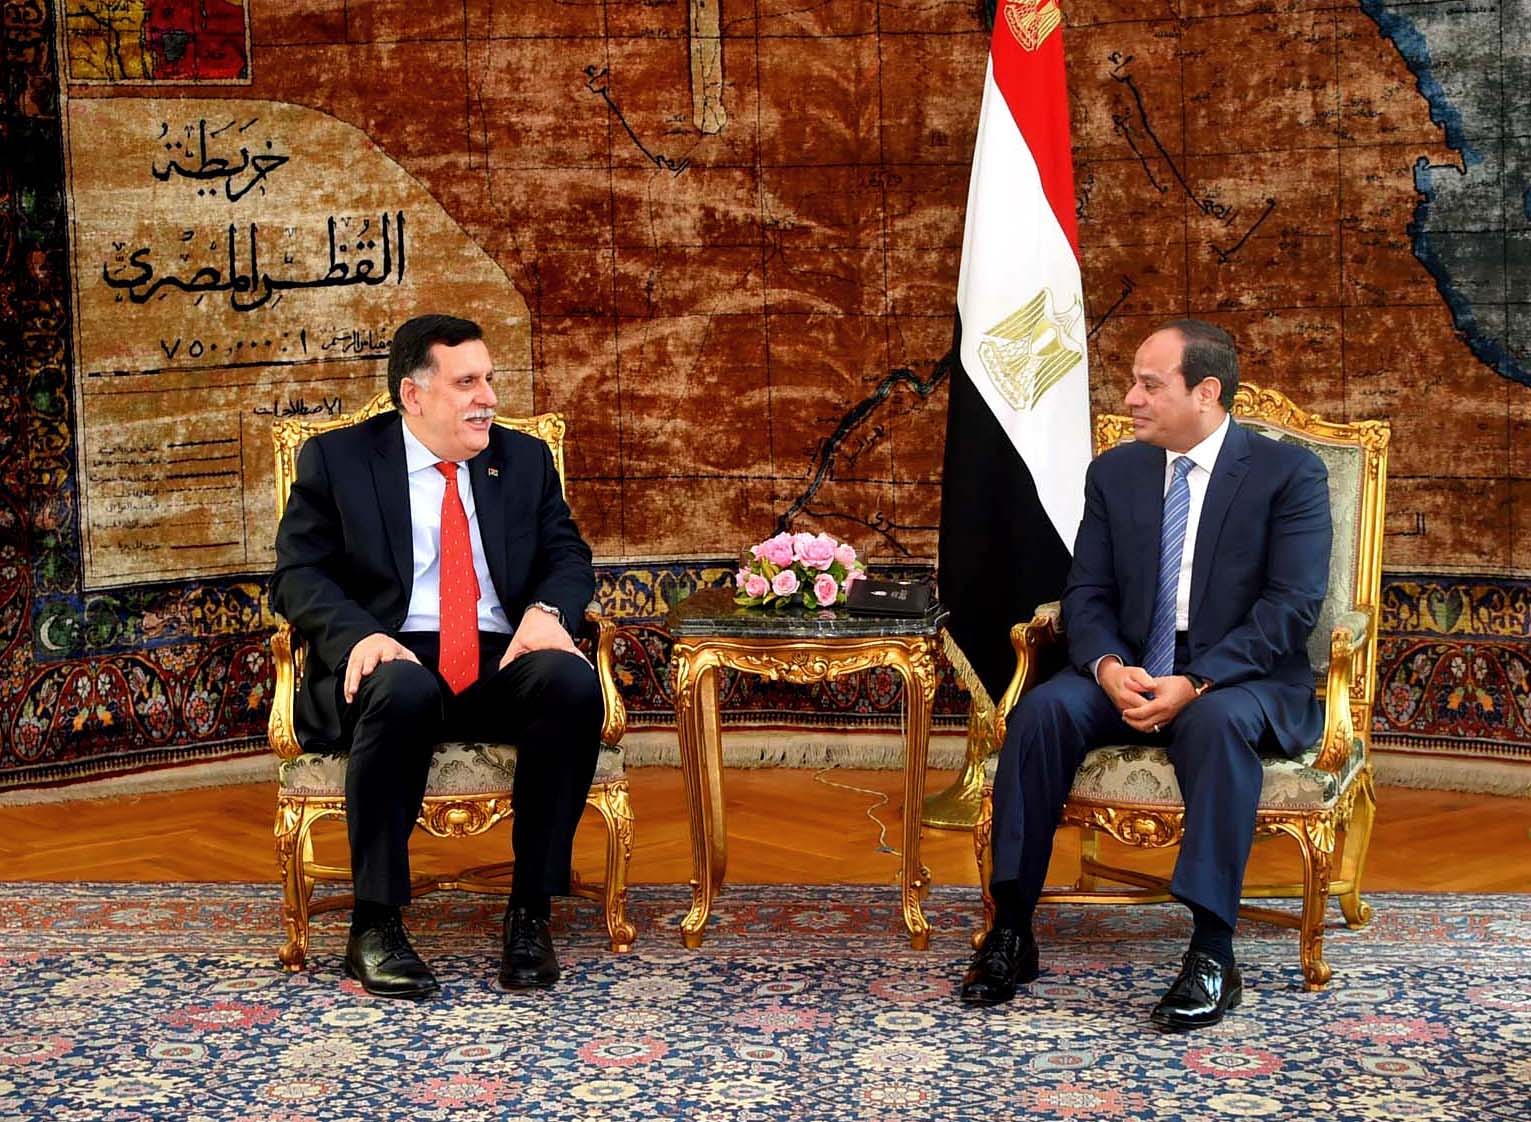 The Egyptian embassy in Tripoli will be reopened soon